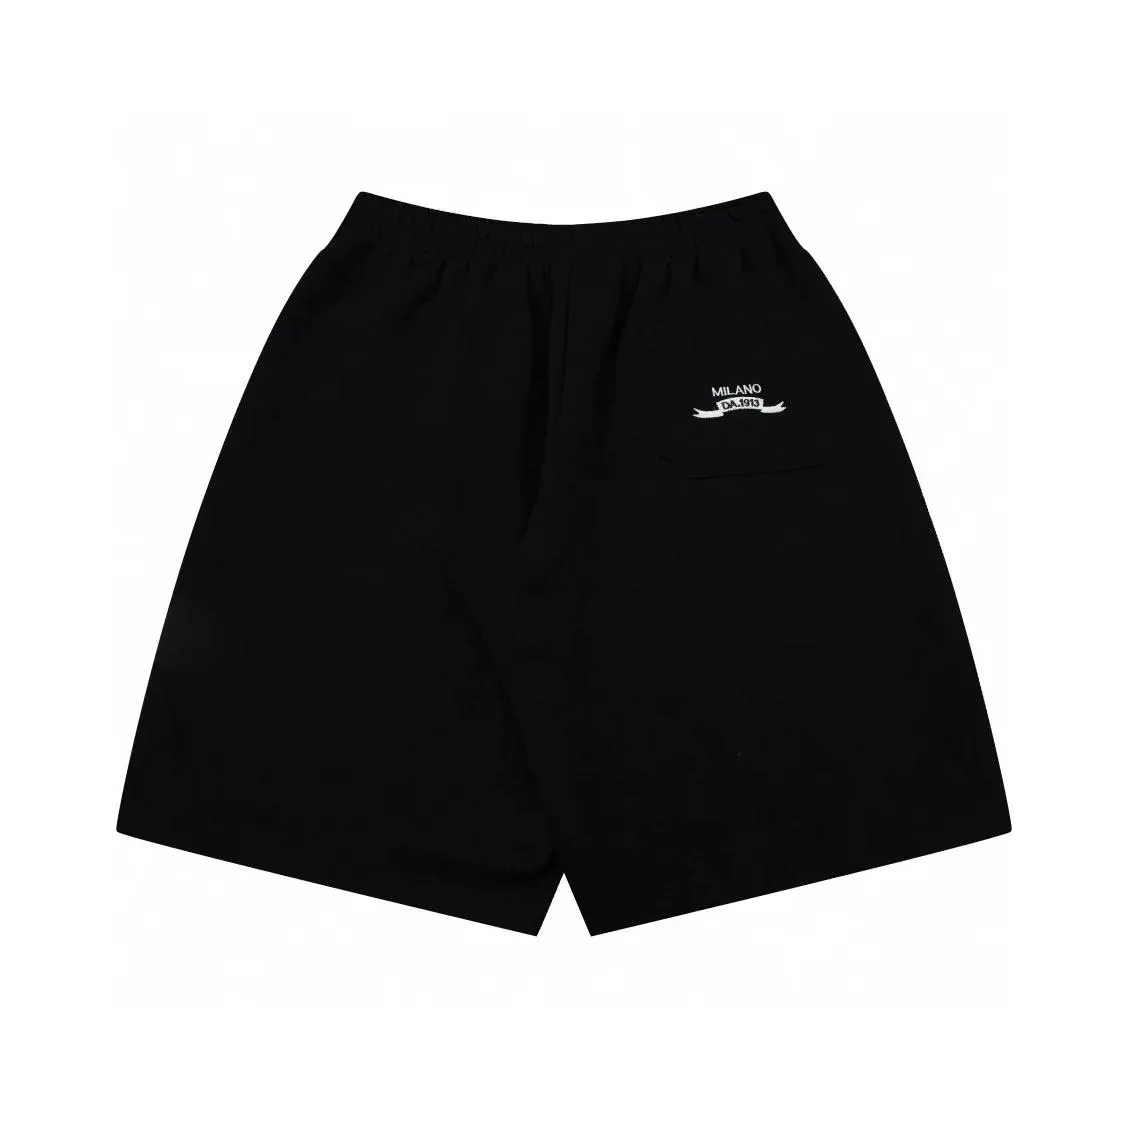 mens plus size shorts polar style summer wear with beach out of the street pure cotton r2y2